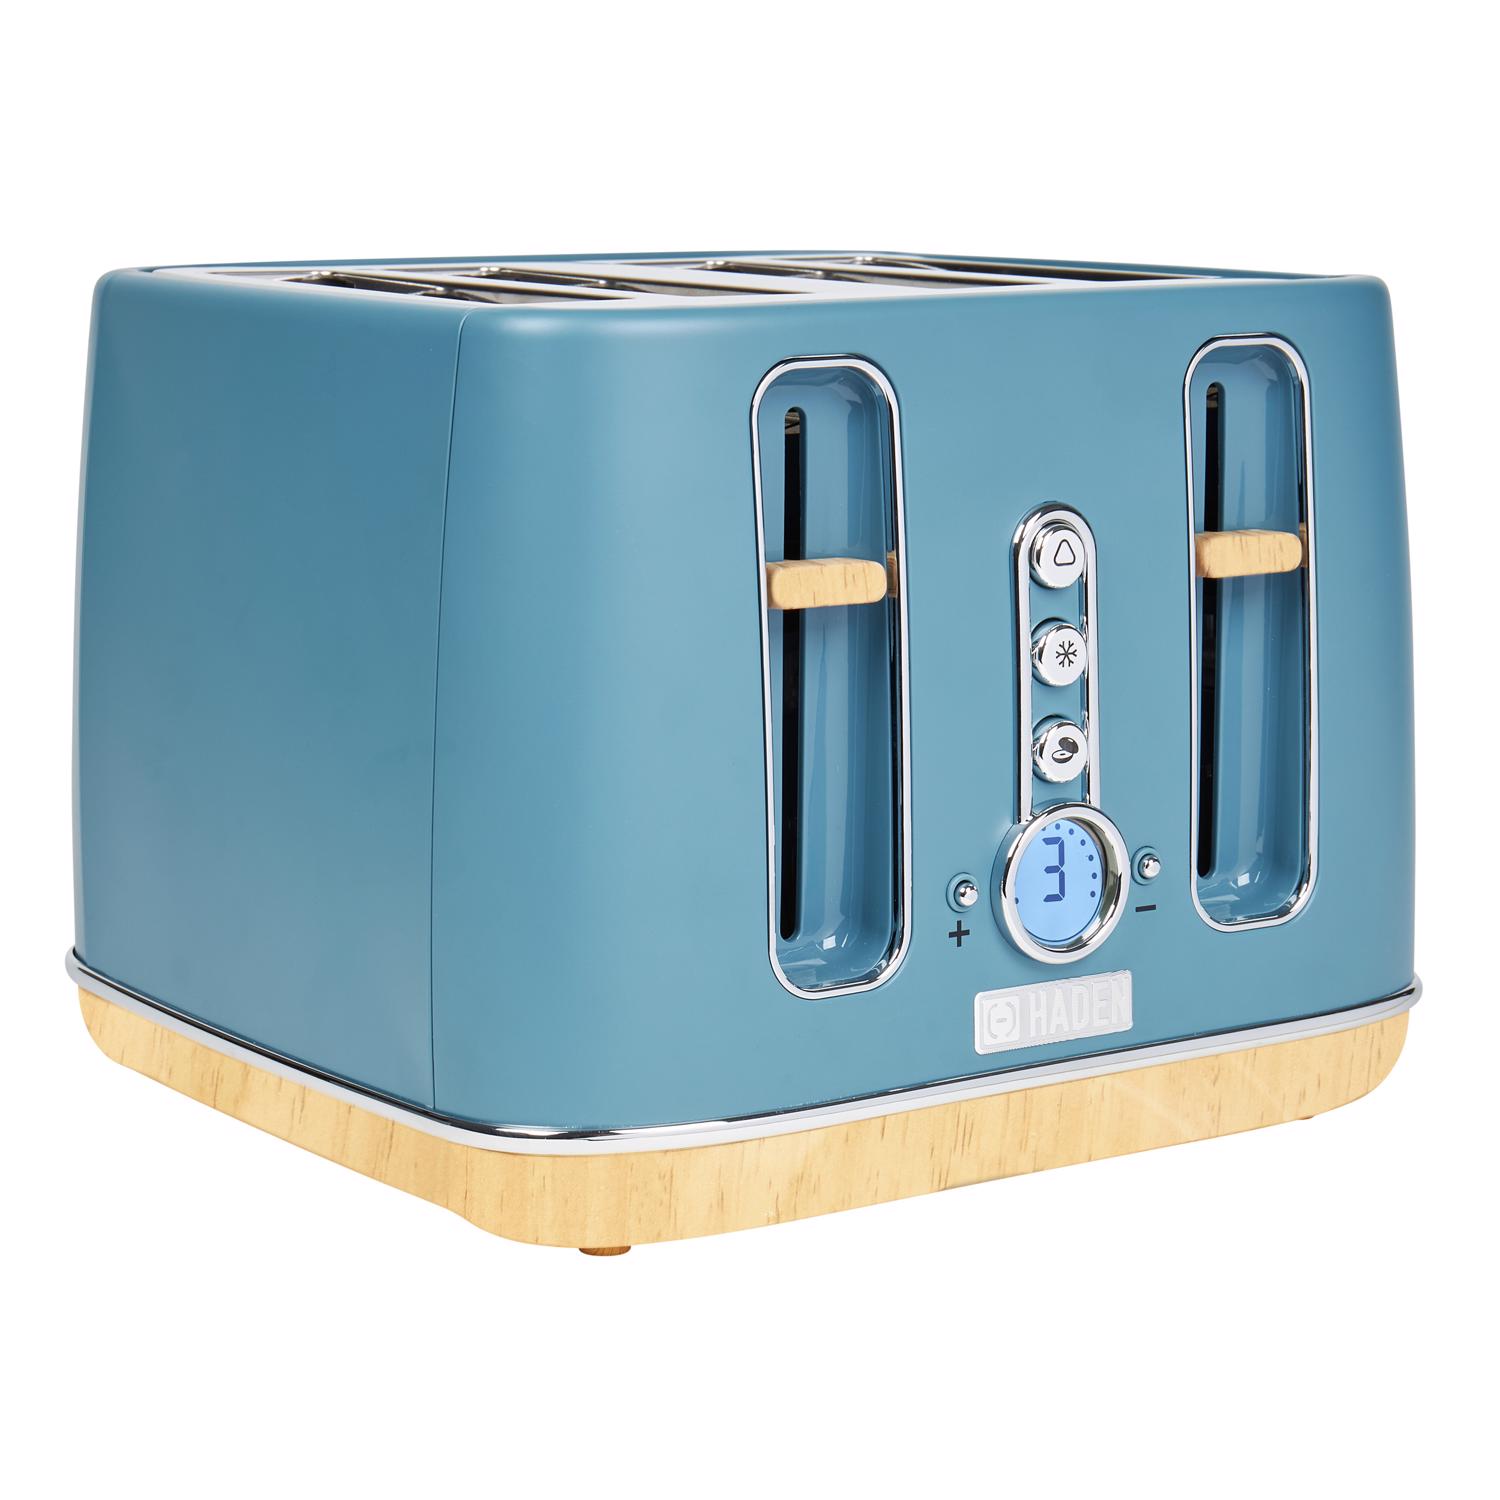 Photos - Toaster Haden Dorchester Stainless Steel Blue 4 slot  9 in. H X 12 in. W X 